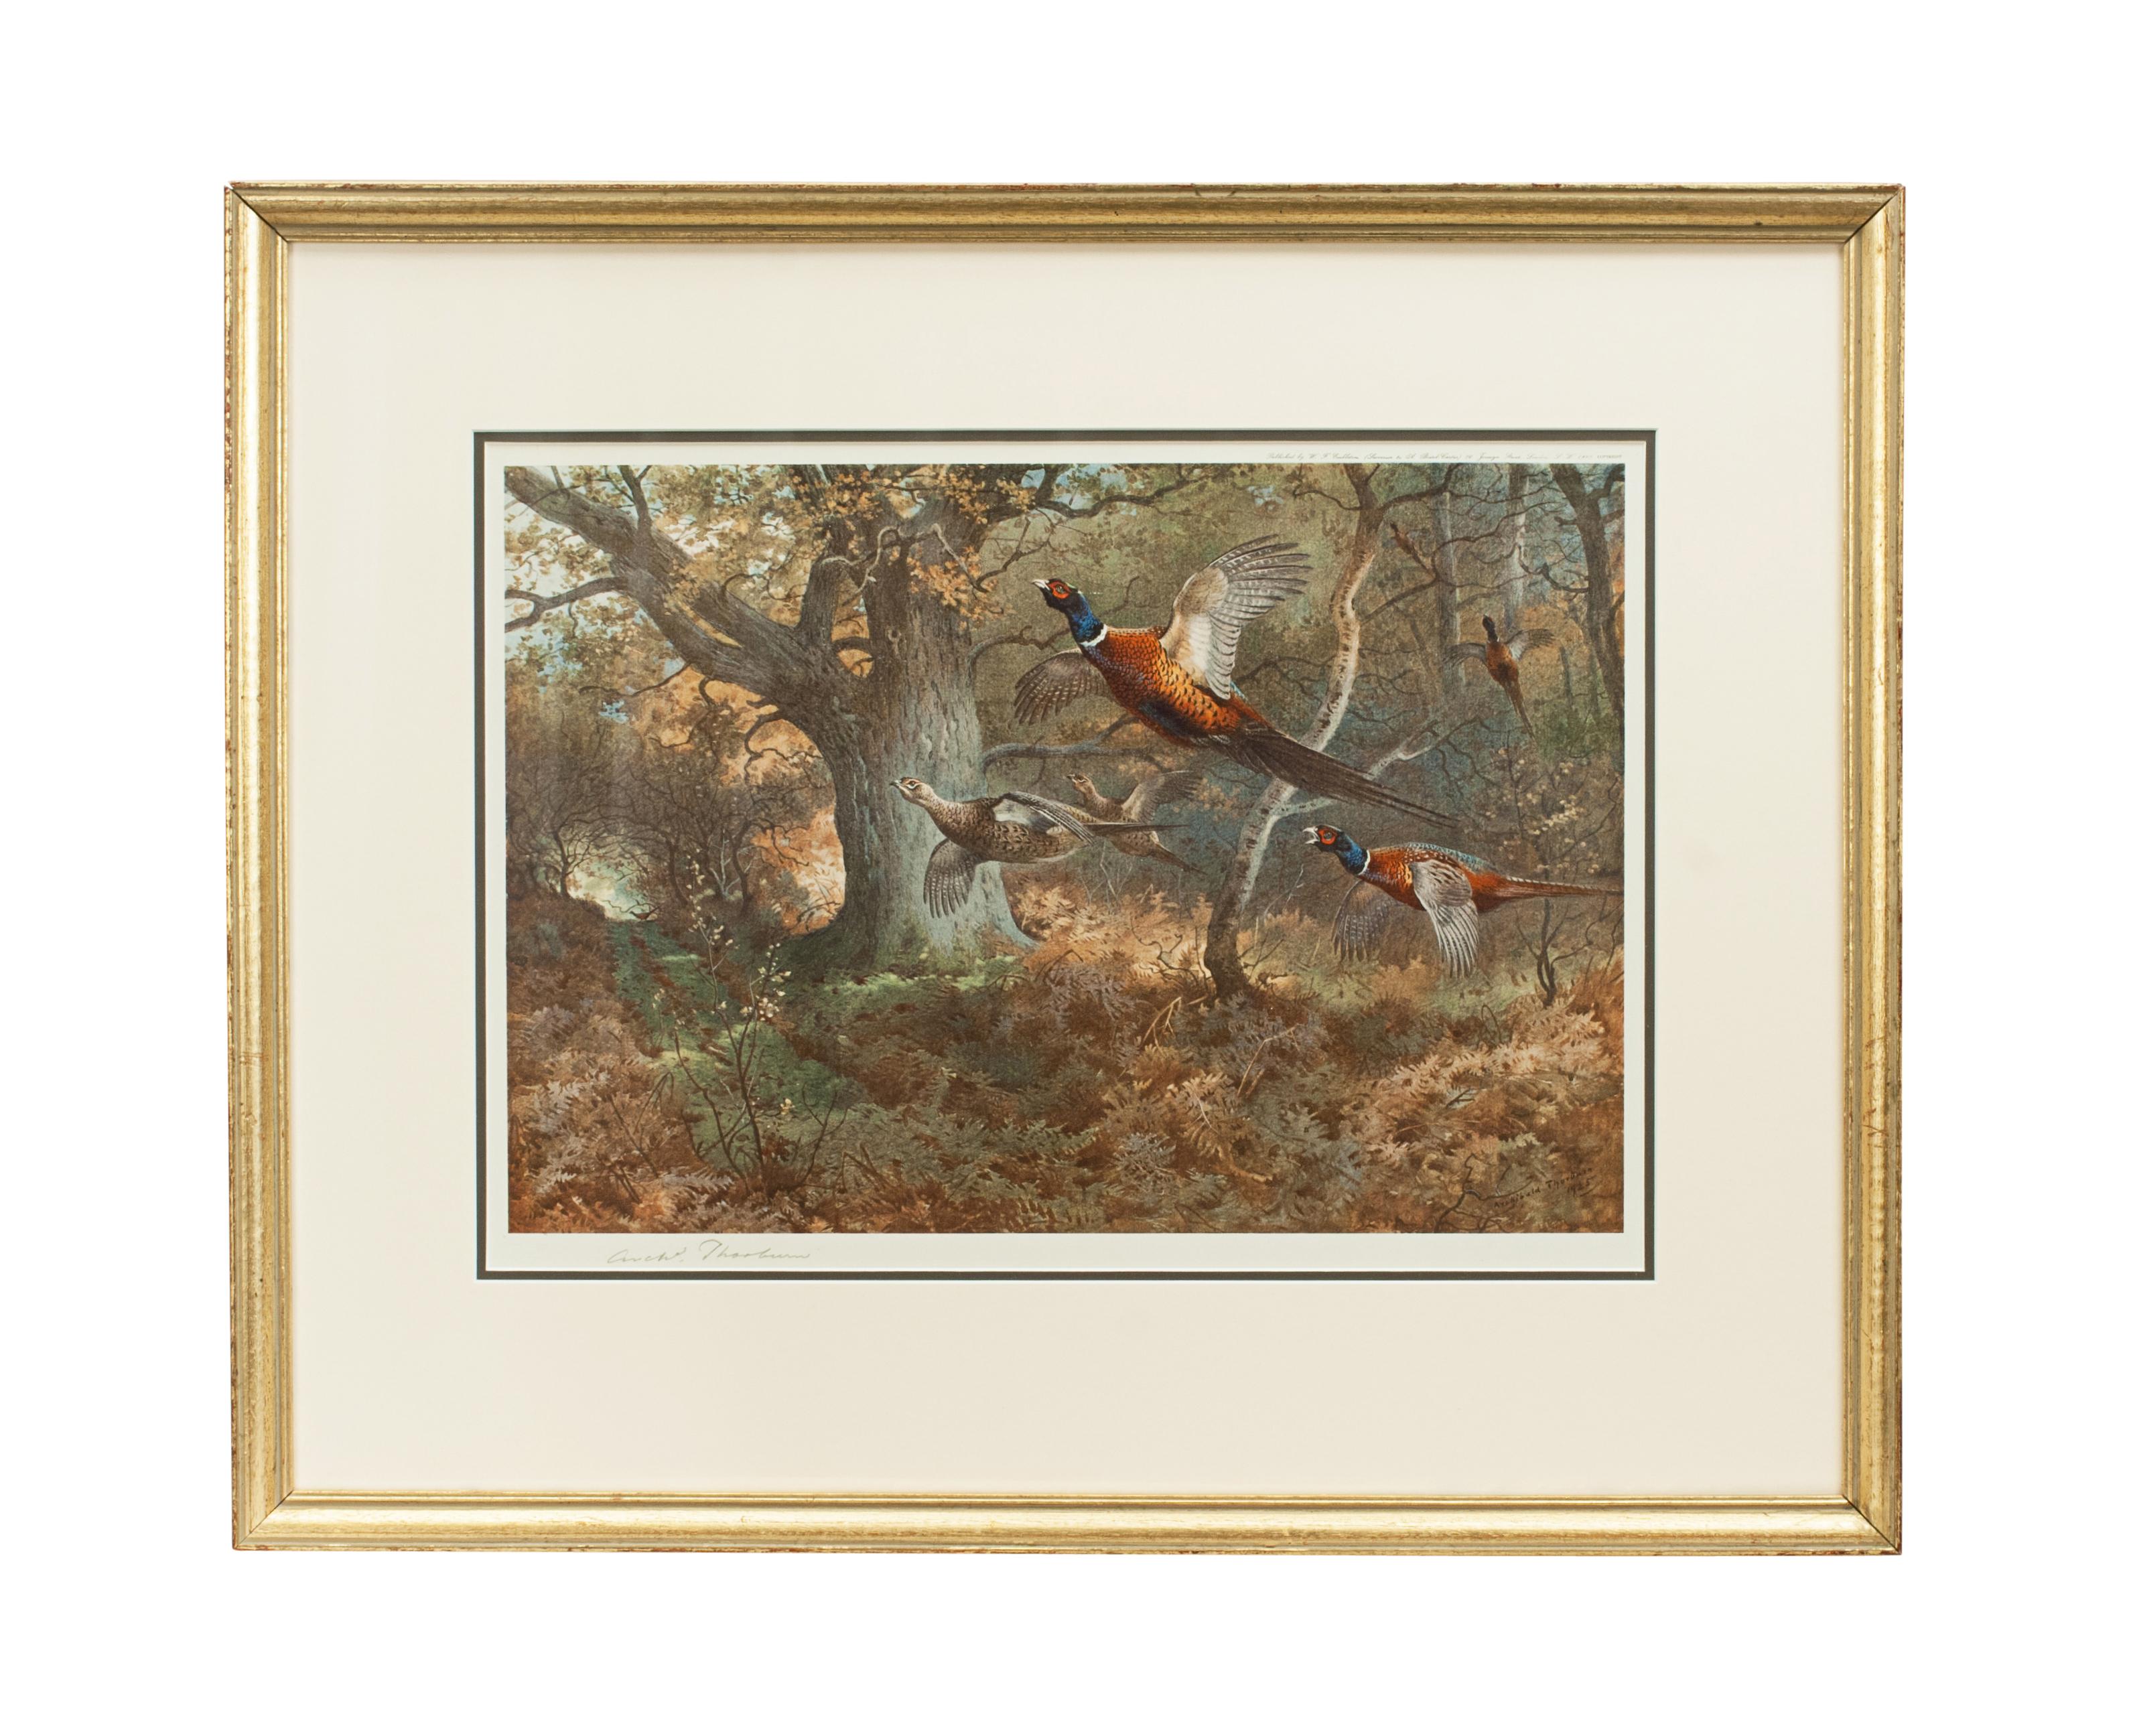 Sporting Art Vintage Game Bird Prints, Colotypes by Archibald Thorburn 'The Seasons'